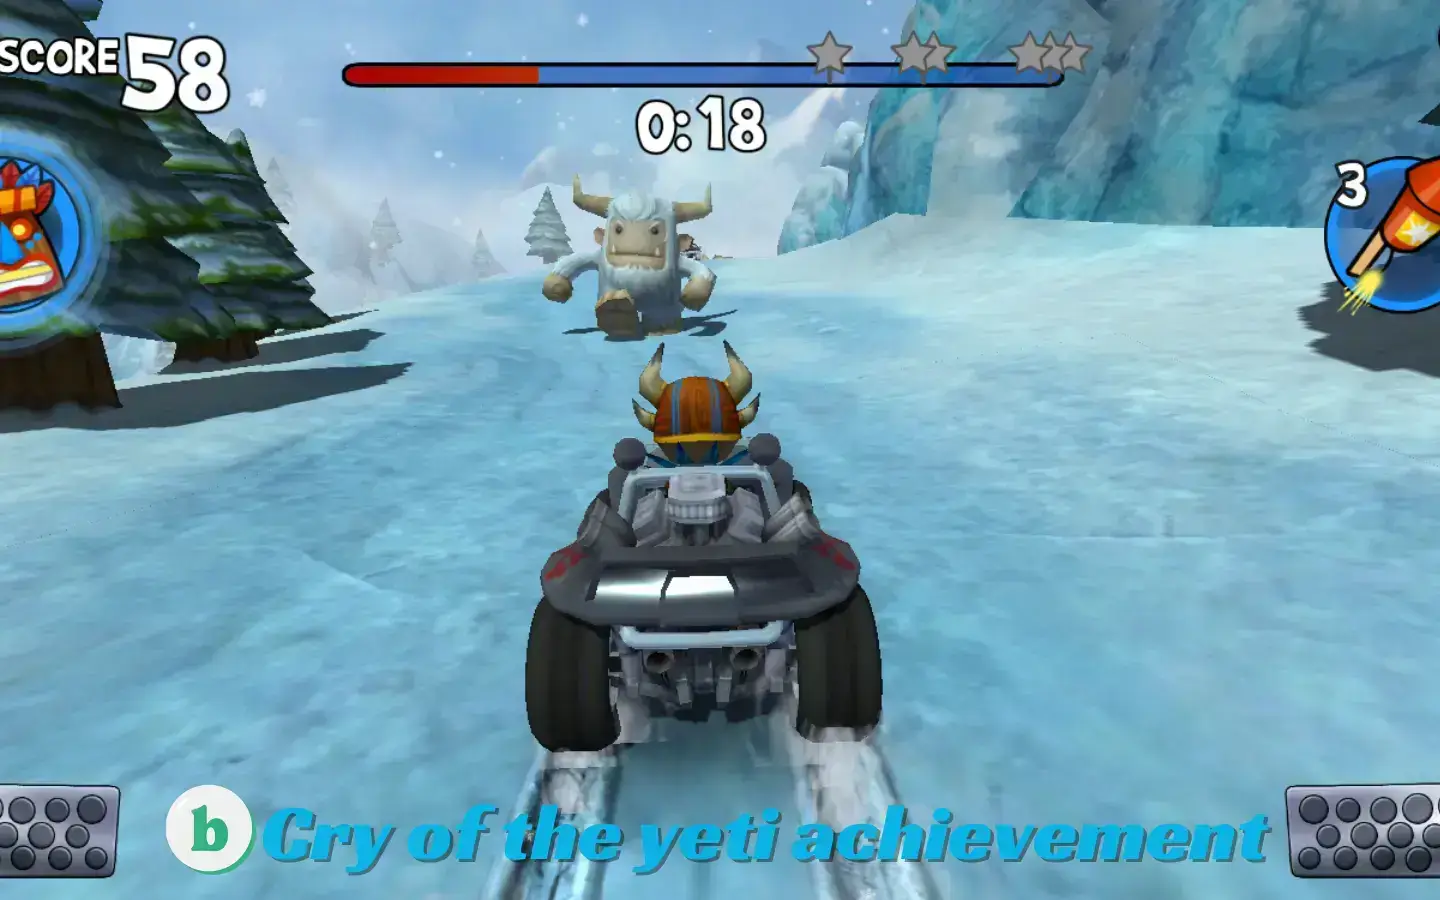 Cry-of-the-yeti-achievements-in-beach-buggy-racing